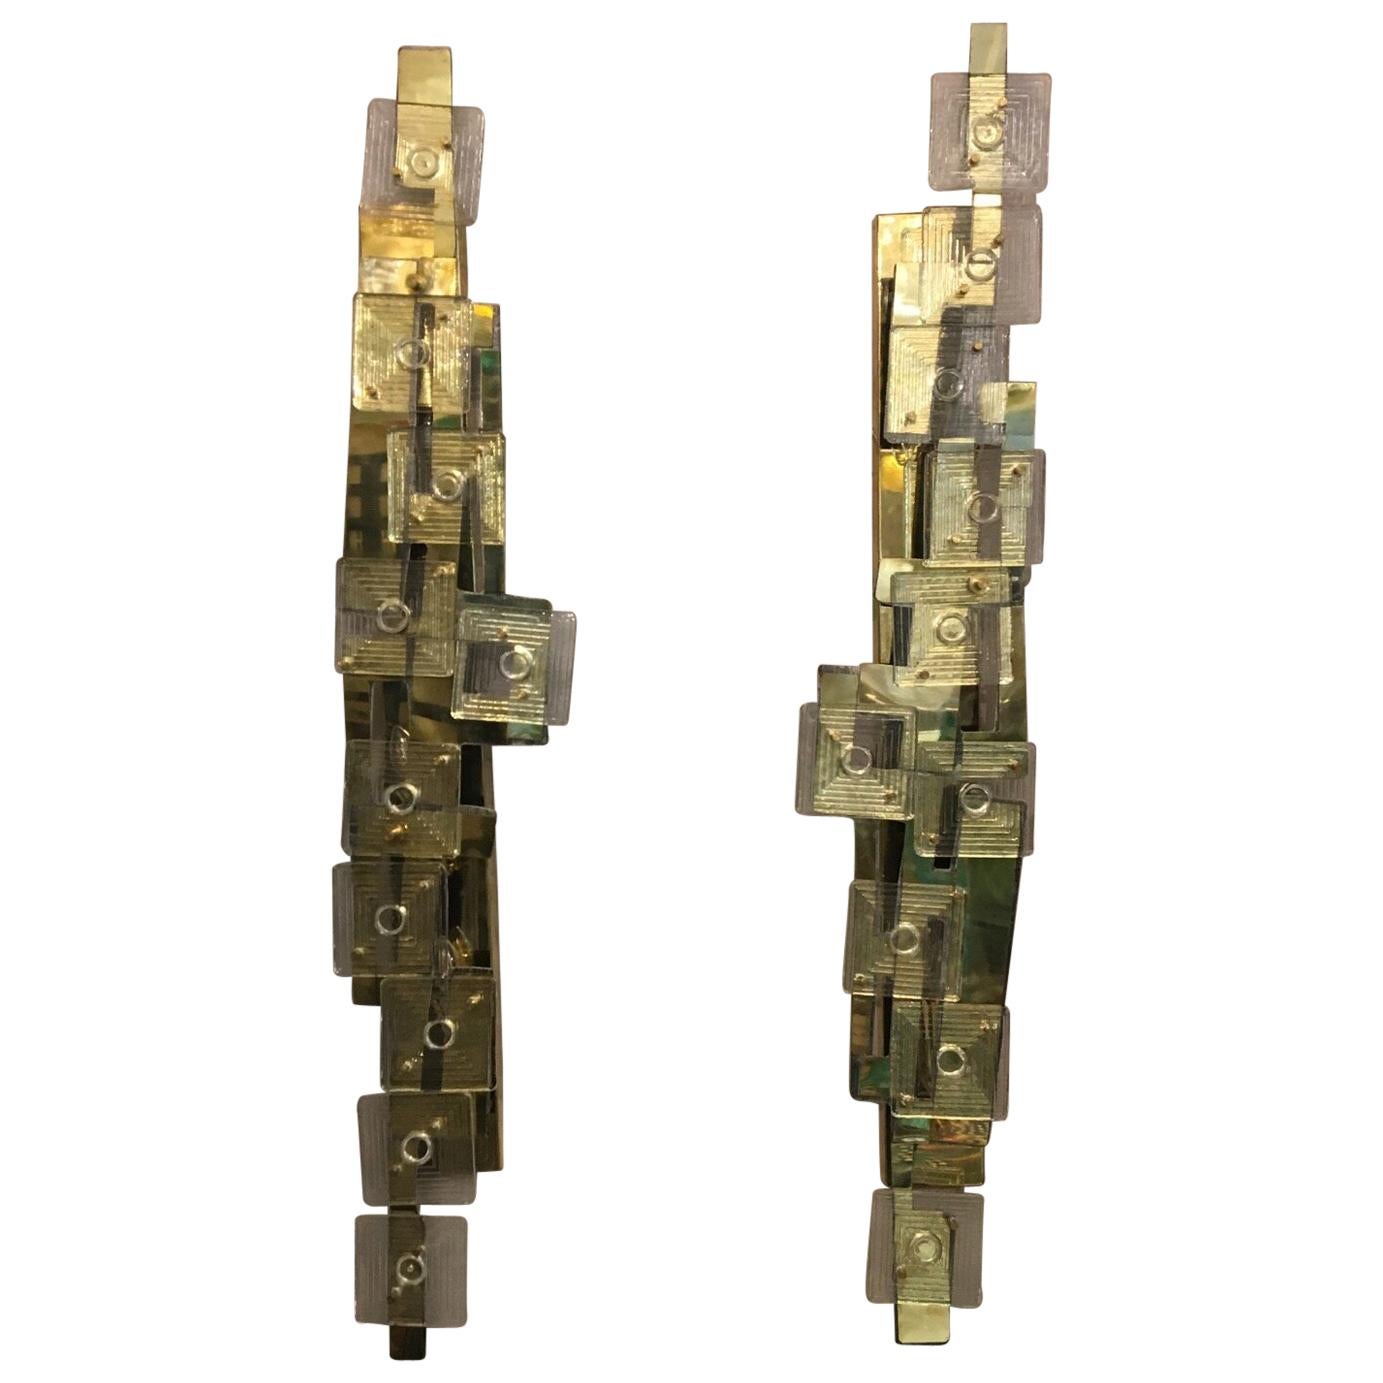 Italian Murano Clear Glass and Brass Tall Wall Sconces, 1980s